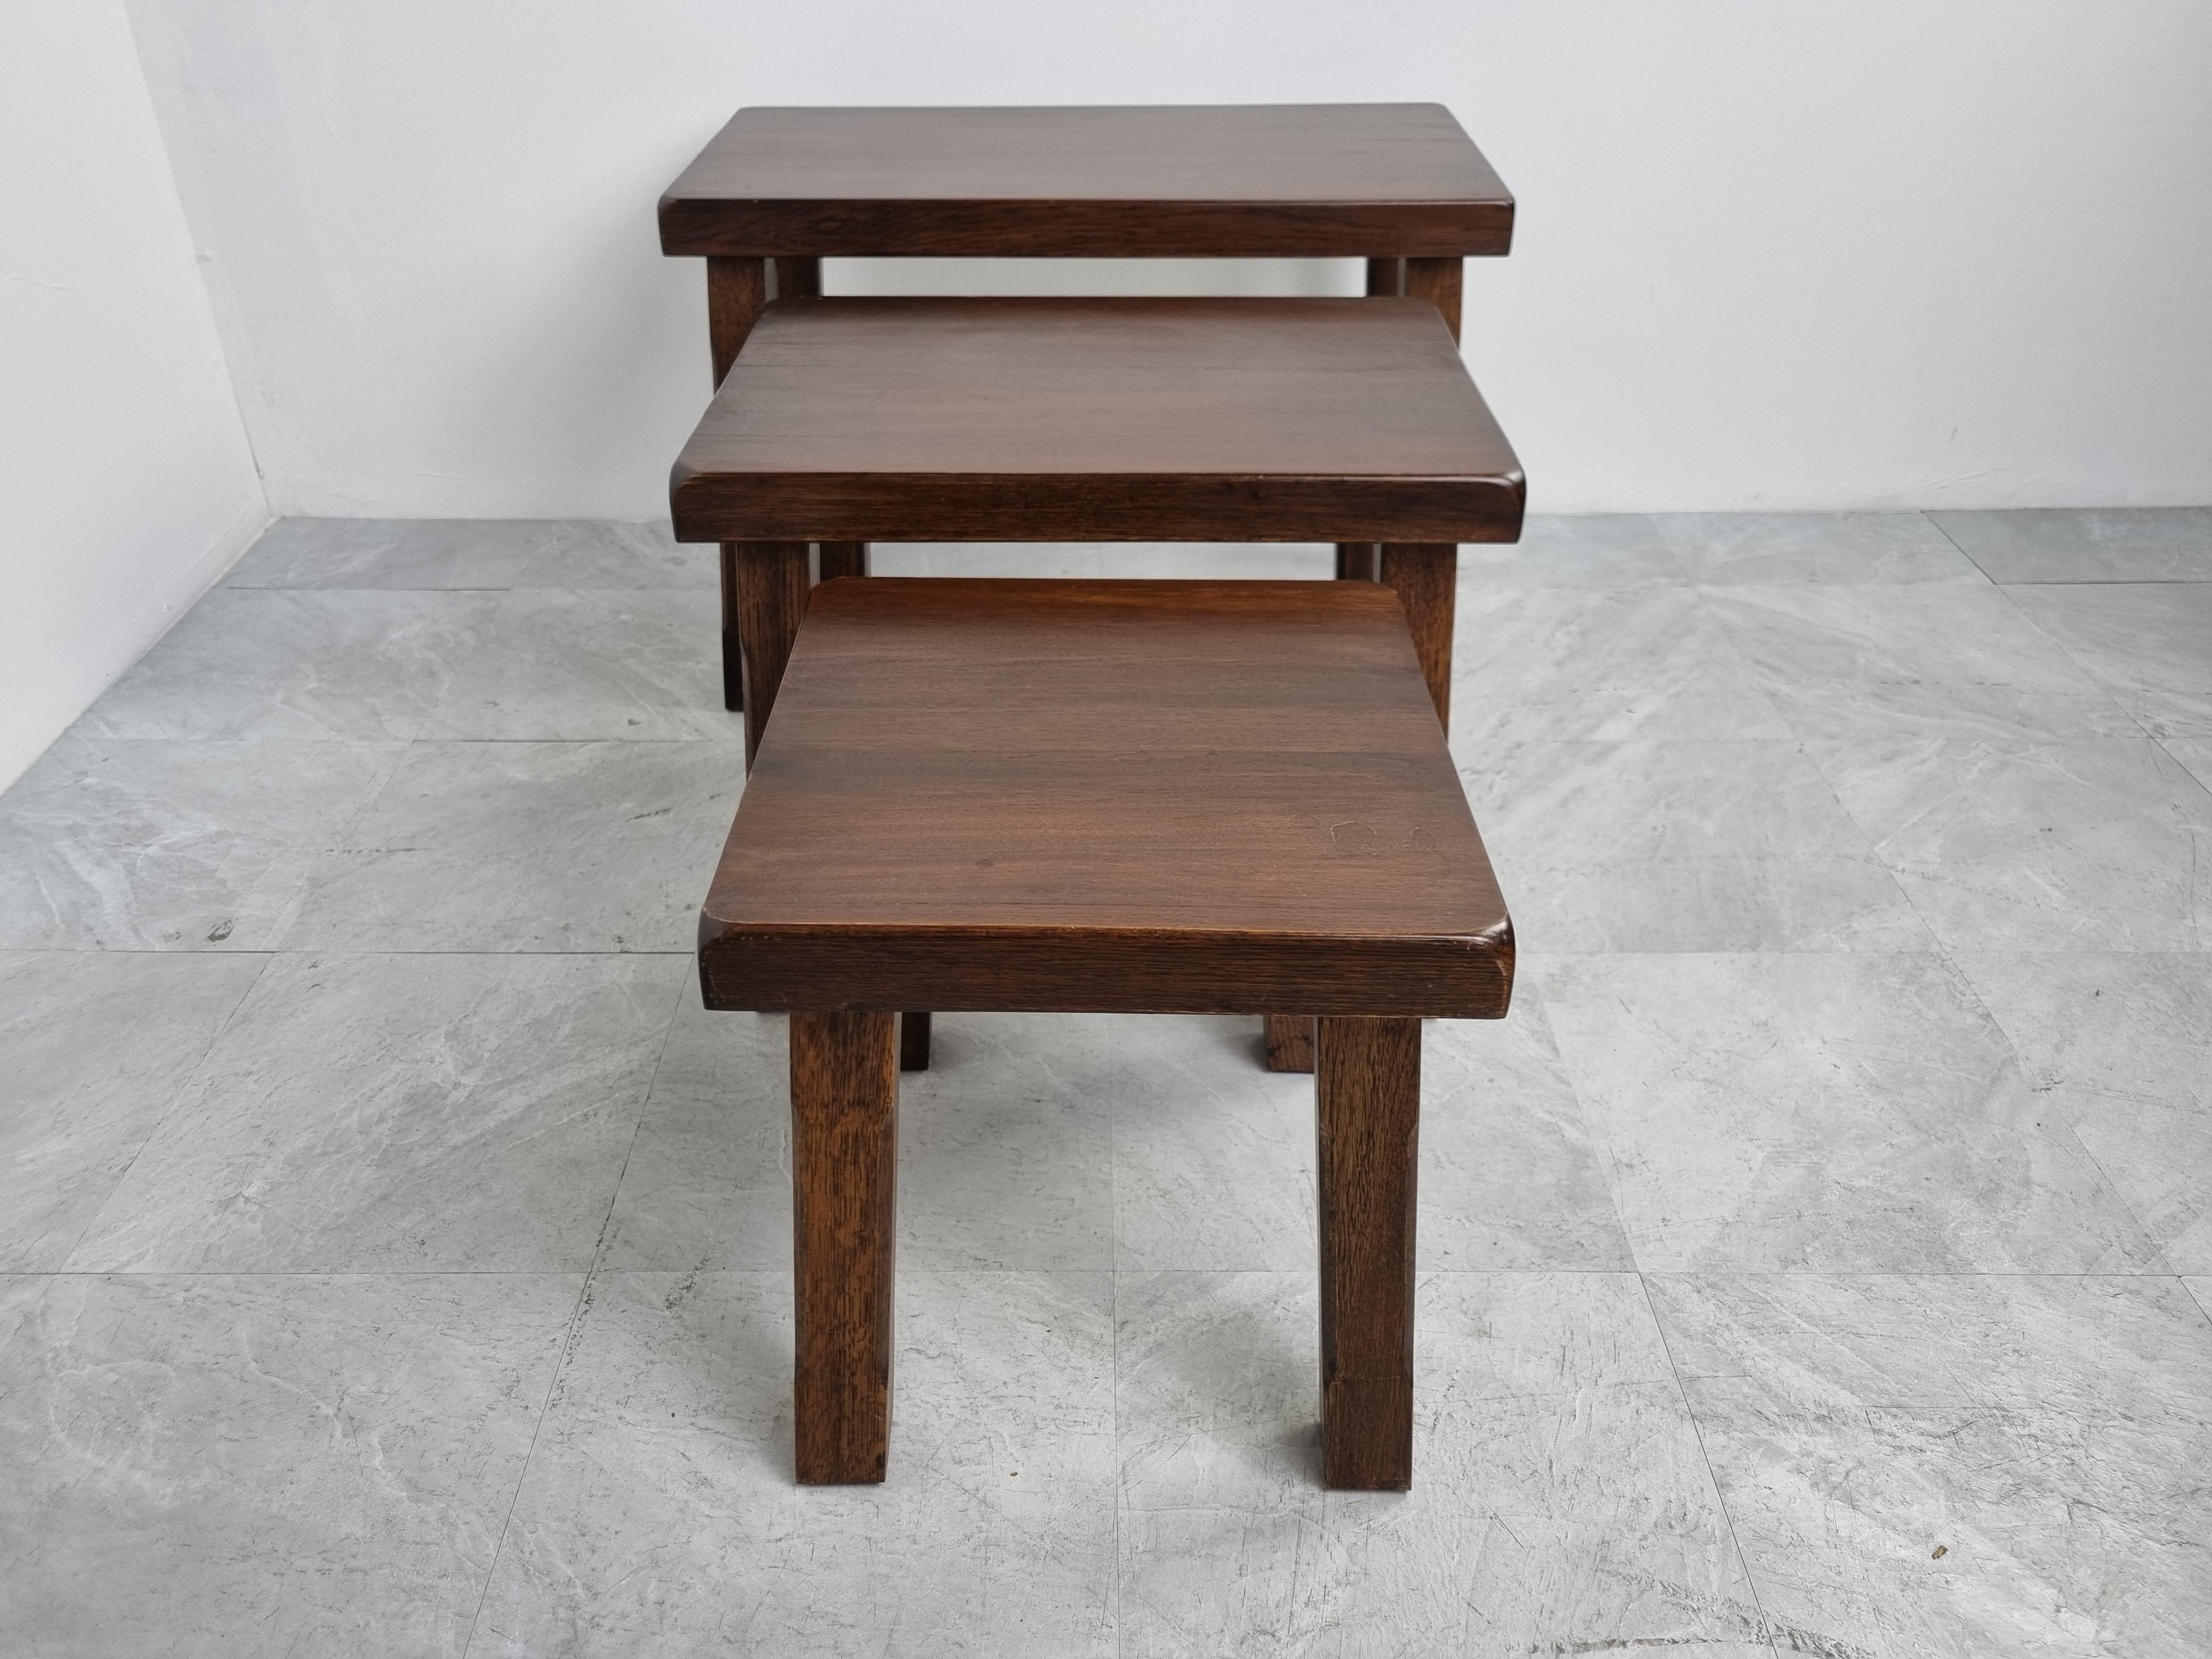 Lovely set of Brutalist oak nesting tables.

Primitive and robuste design.

1960s - Belgium

Good condition

Dimensions of the largest table:

Height: 44cm / 17.32